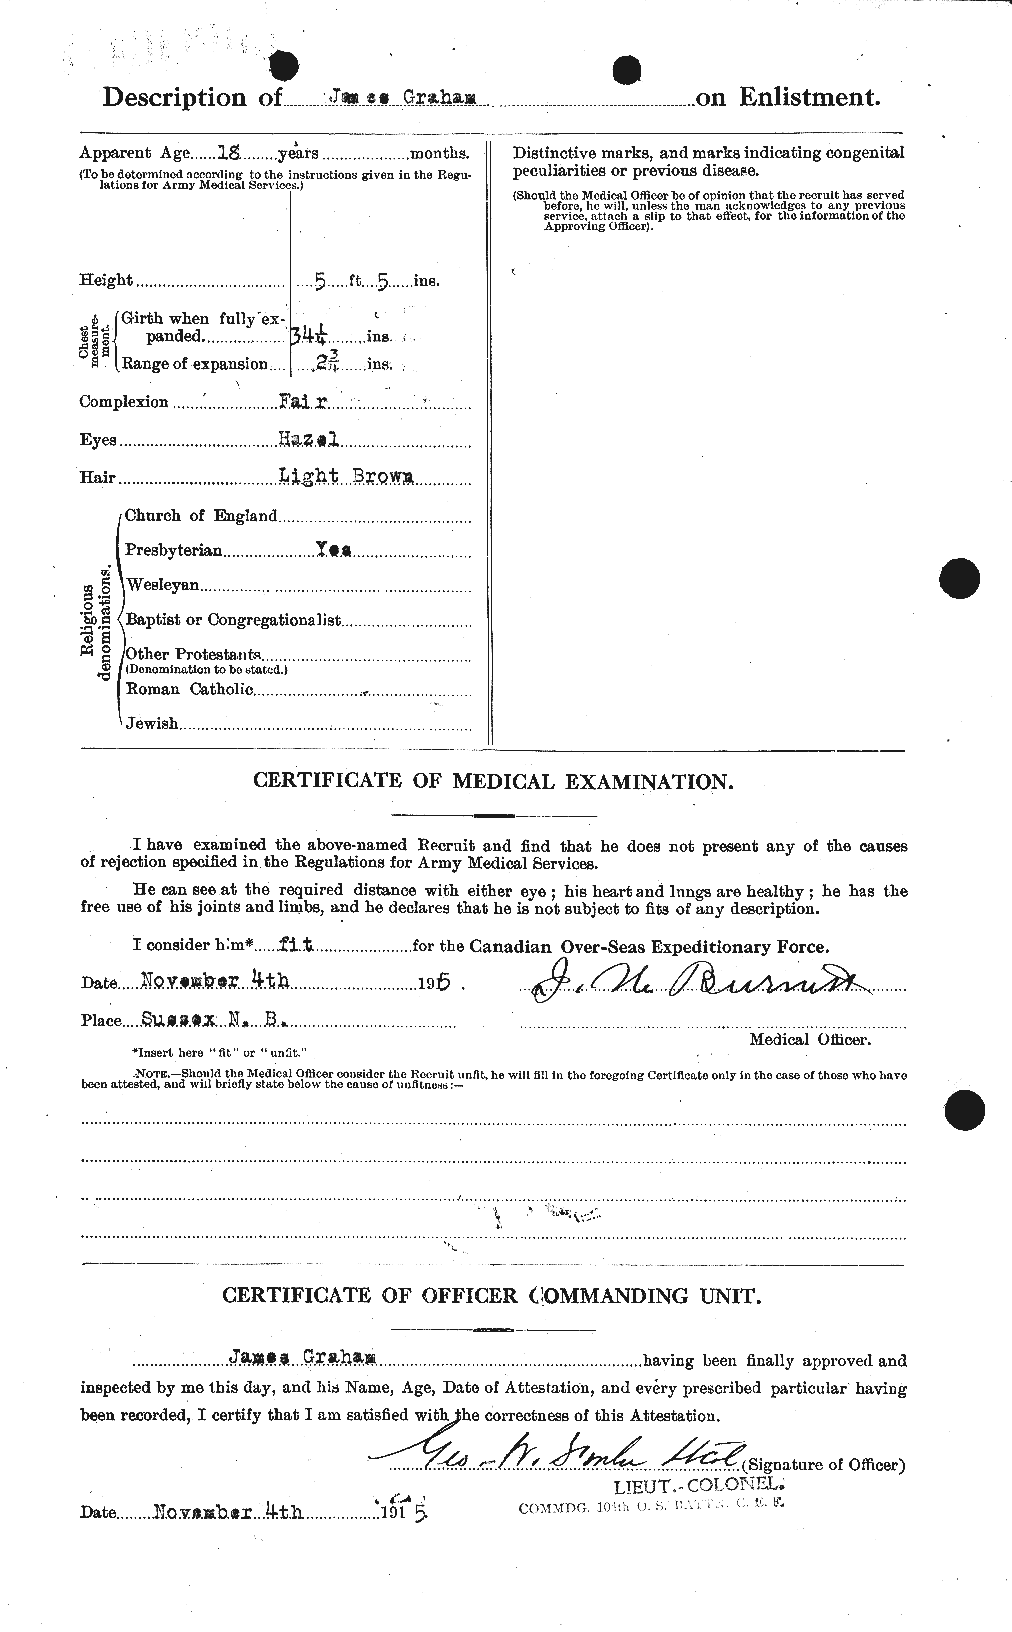 Personnel Records of the First World War - CEF 357777b